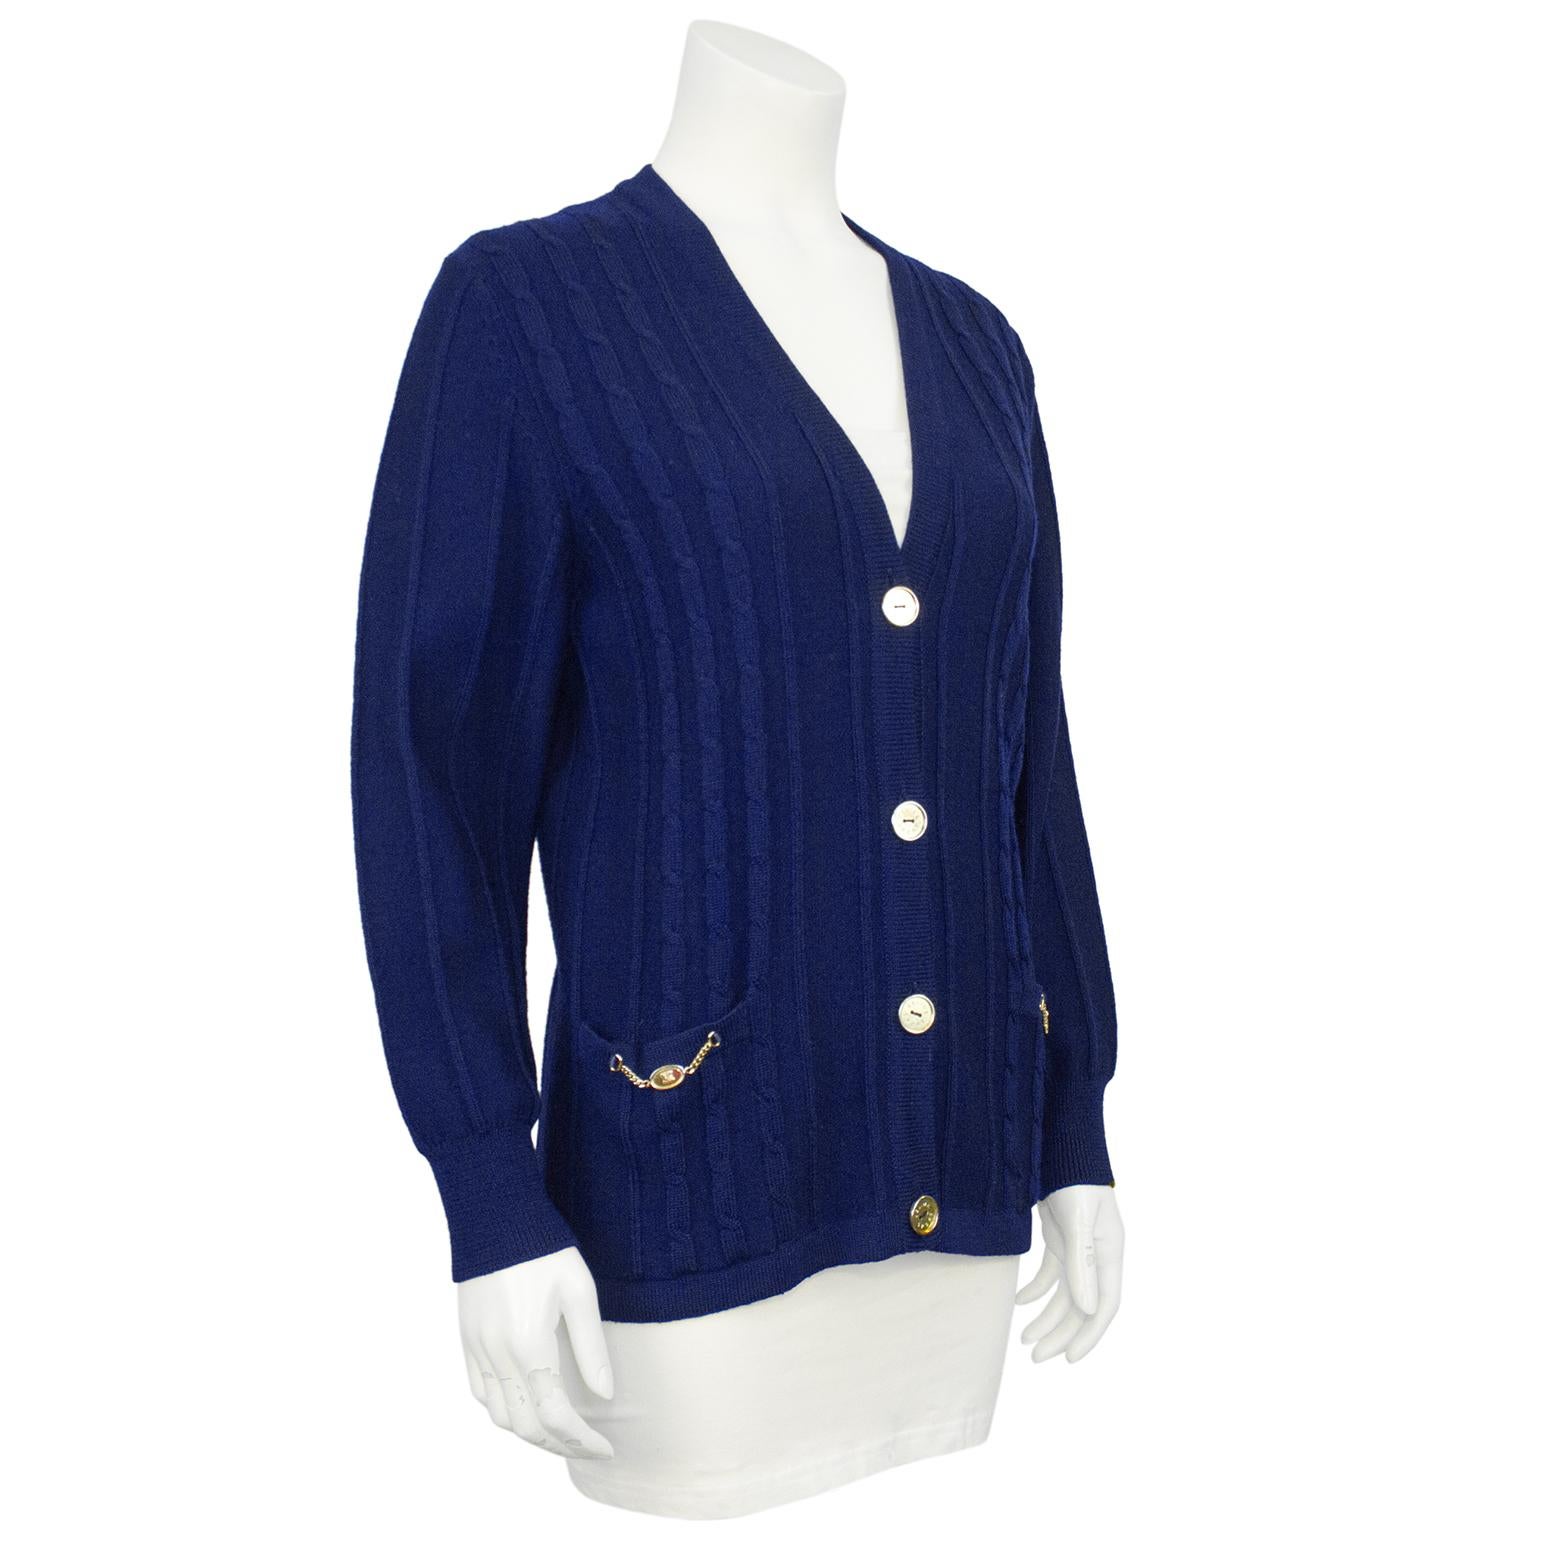 Celine navy wool cable knit sweater from the 1970s. From the Ira Berg Boutique in Toronto, Canada. Gorgeous navy wool with gold accent buttons and signature chains on the front patch pockets. Buttons are engraved with 